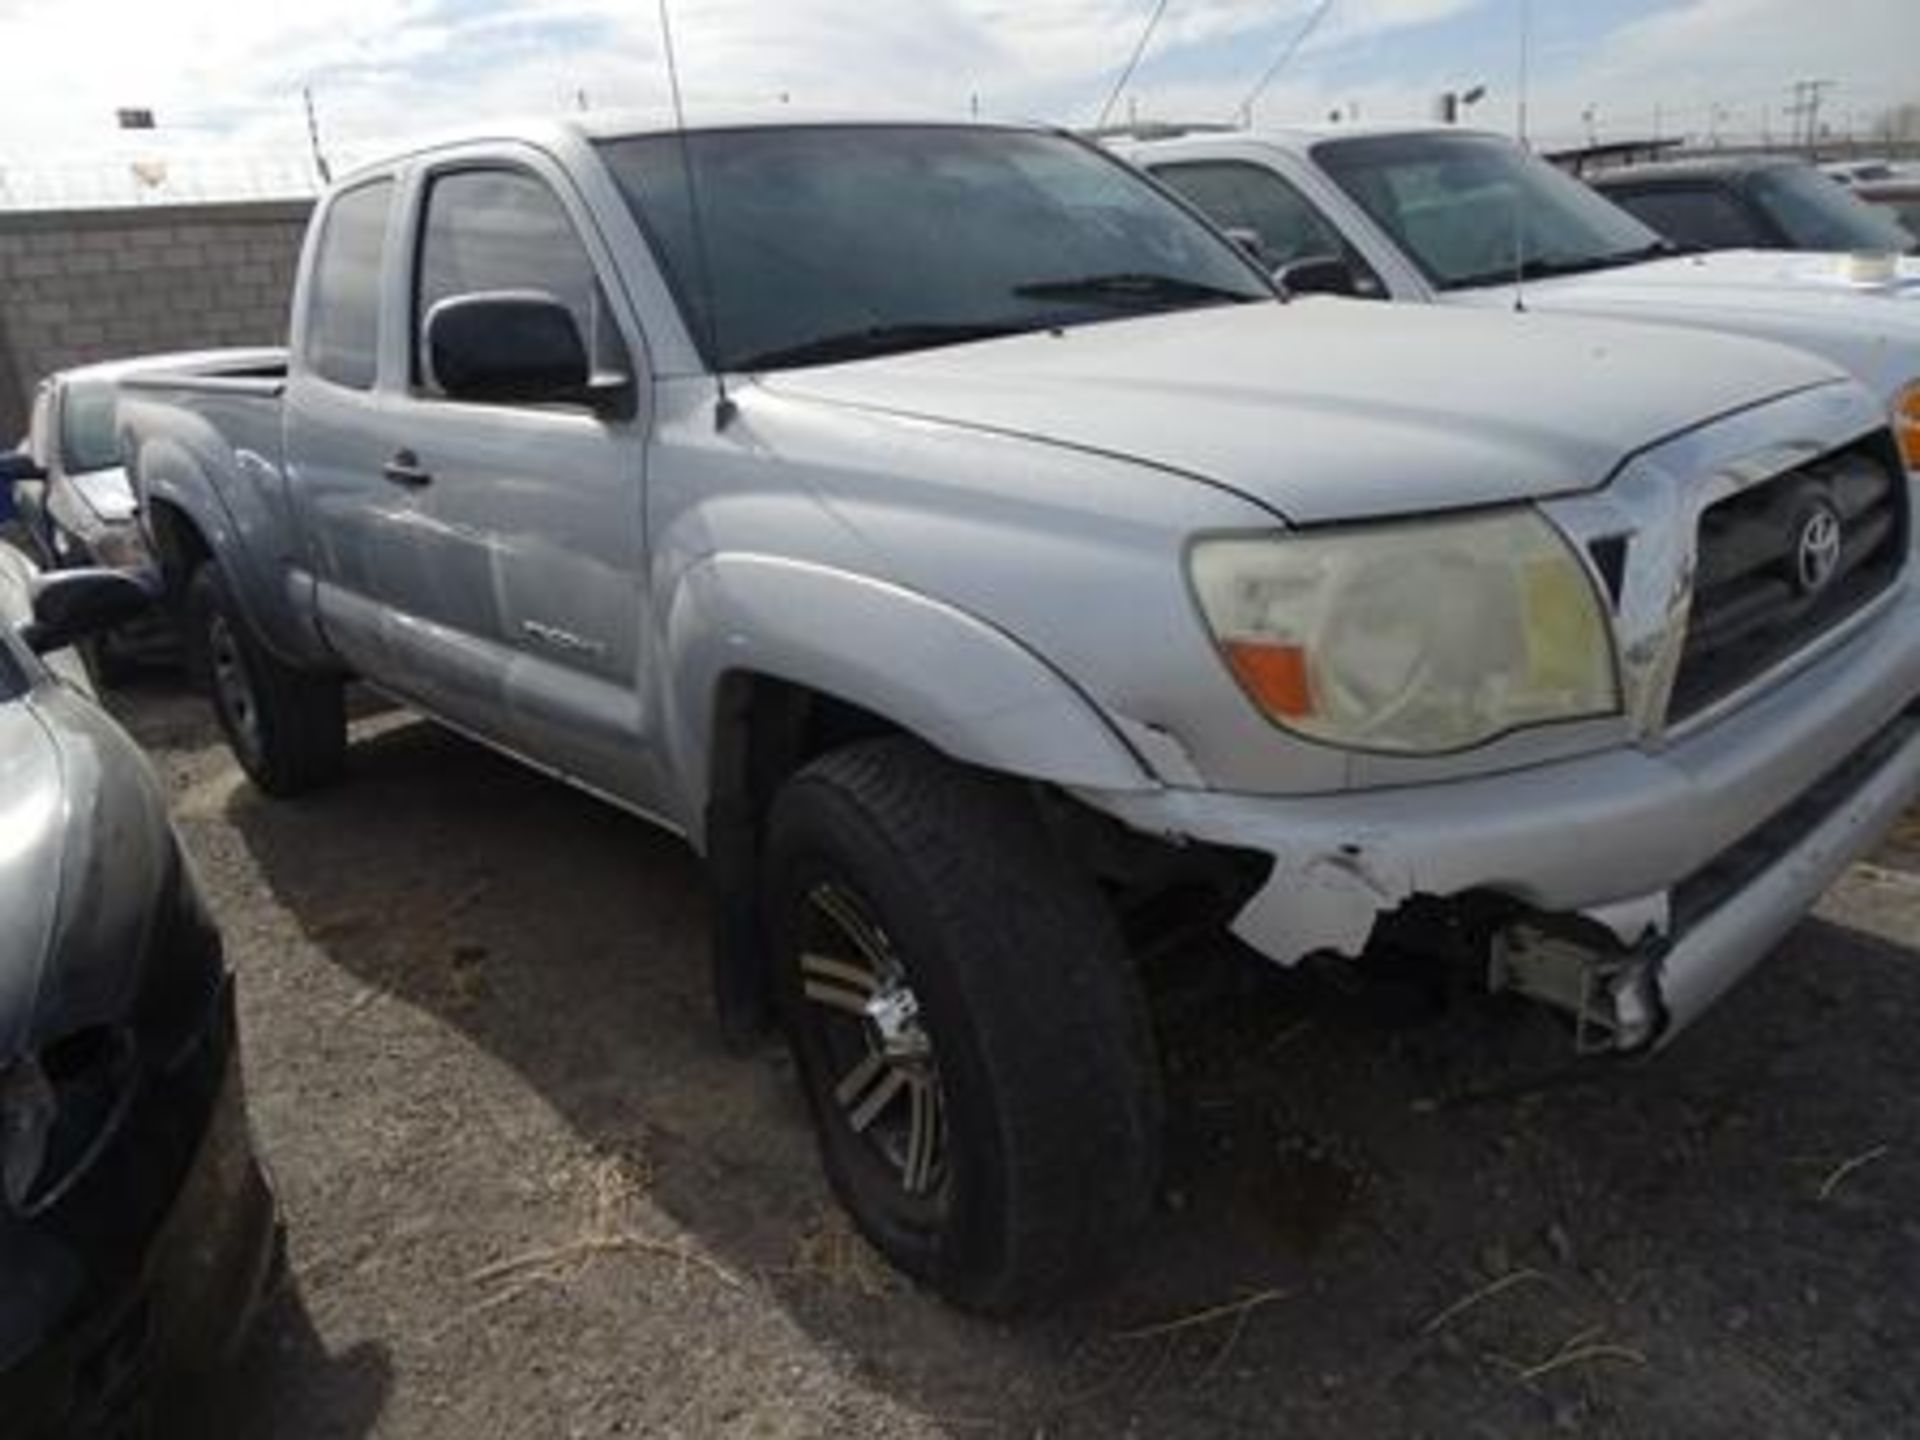 Vehículo Marca Toyota, Linea Tacoma, Tipo Pick Up, Modelo 2007, Color Gris, Located In: Chihuahua, - Bild 2 aus 19